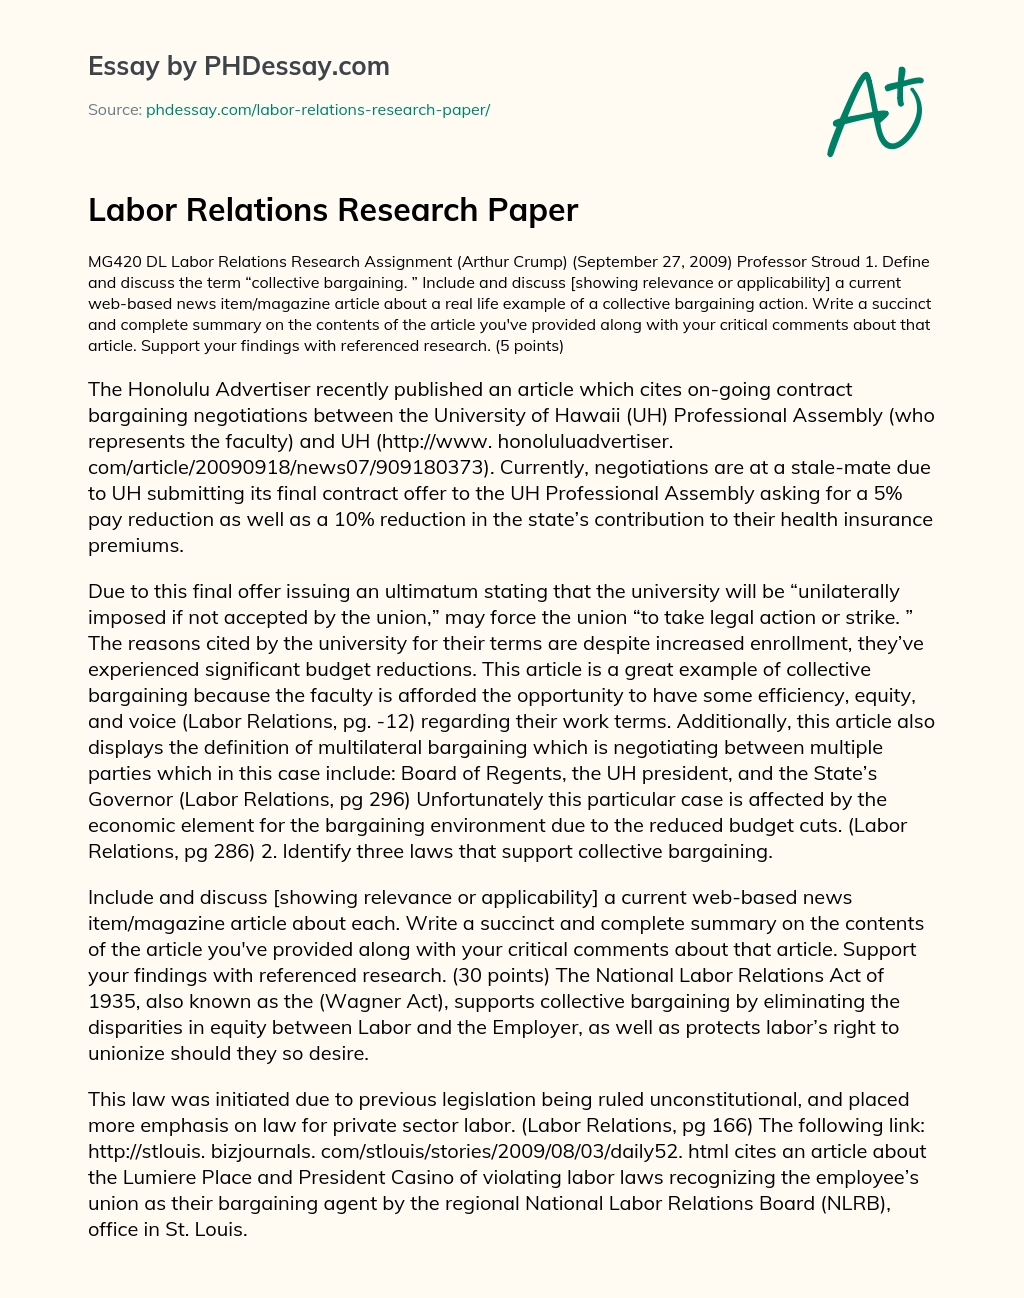 Labor Relations Research Paper essay